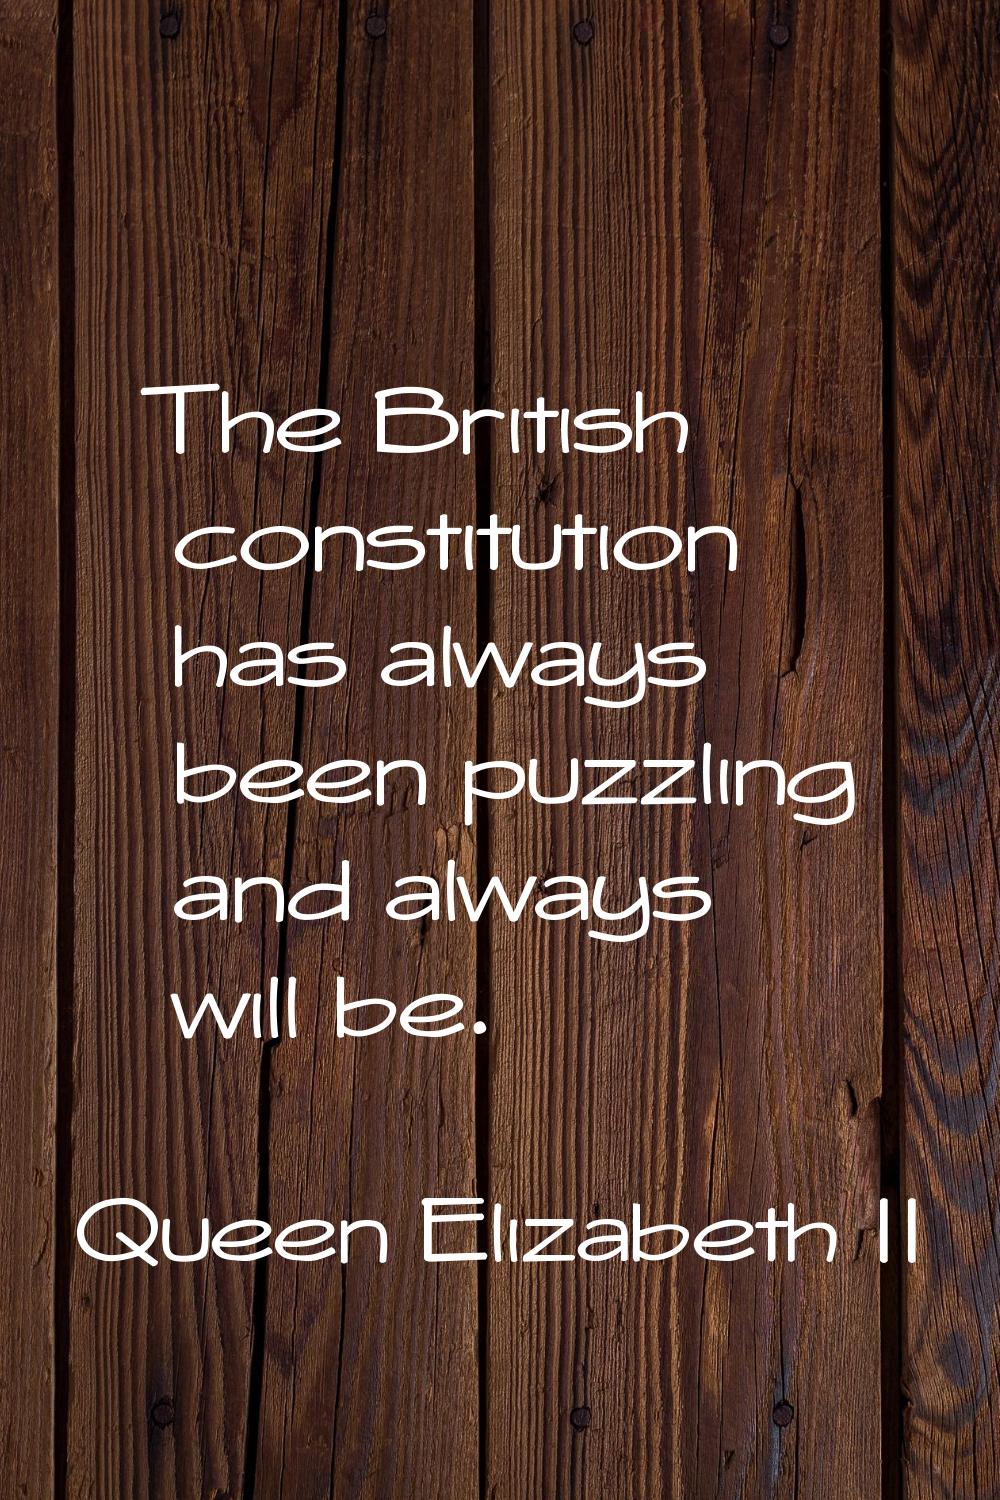 The British constitution has always been puzzling and always will be.